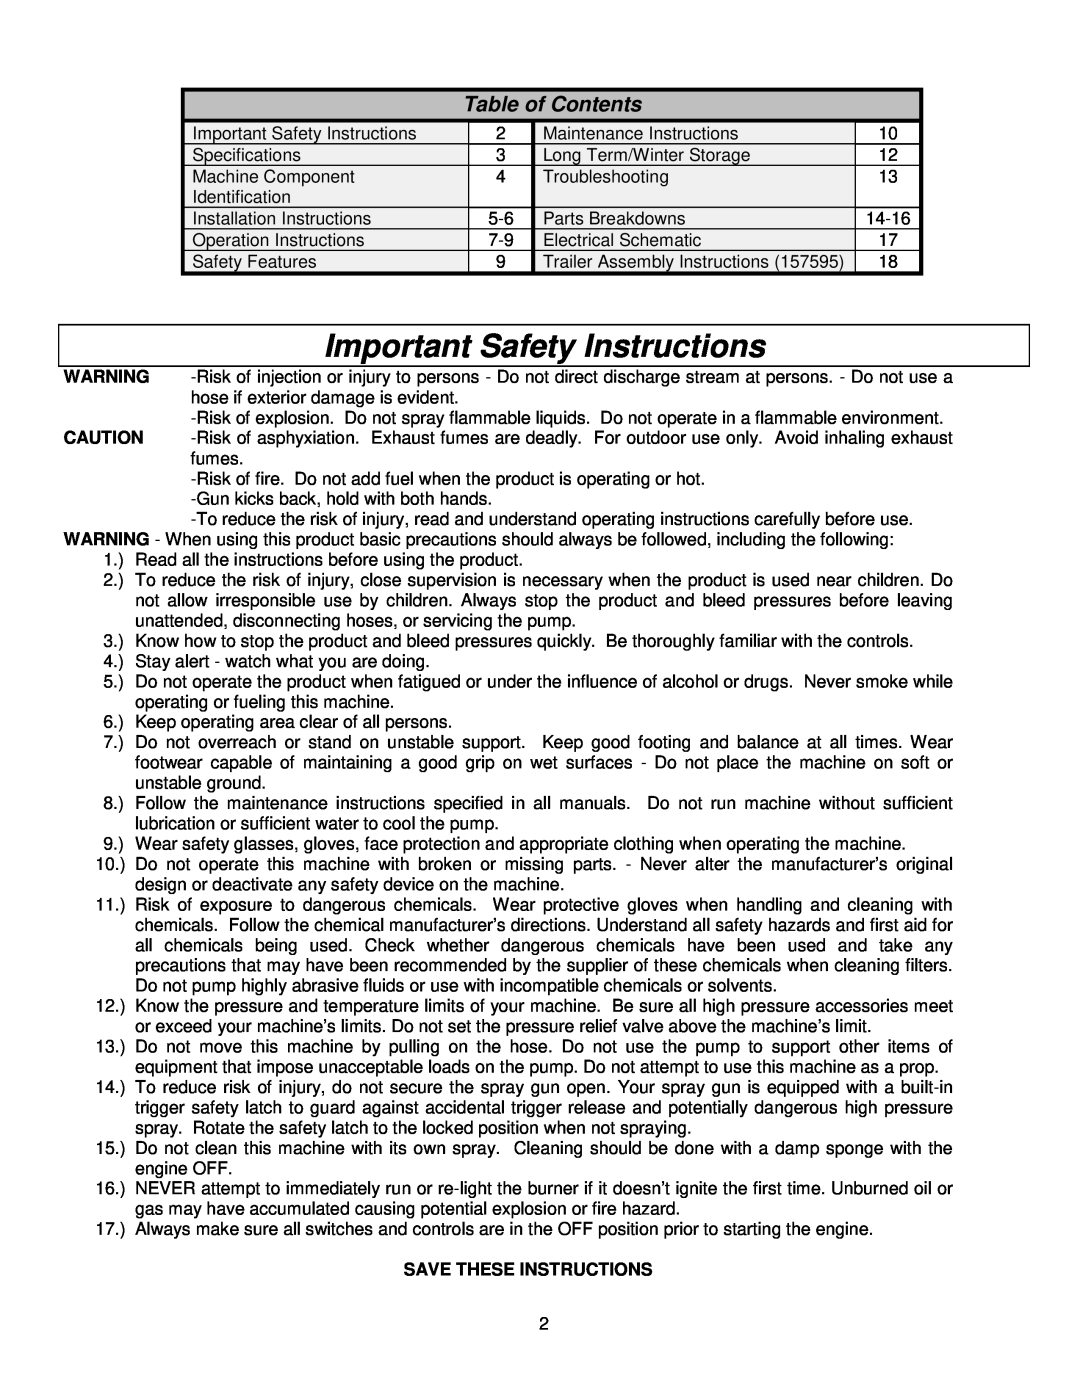 Panasonic M157594J specifications Important Safety Instructions, Table of Contents, Save These Instructions 